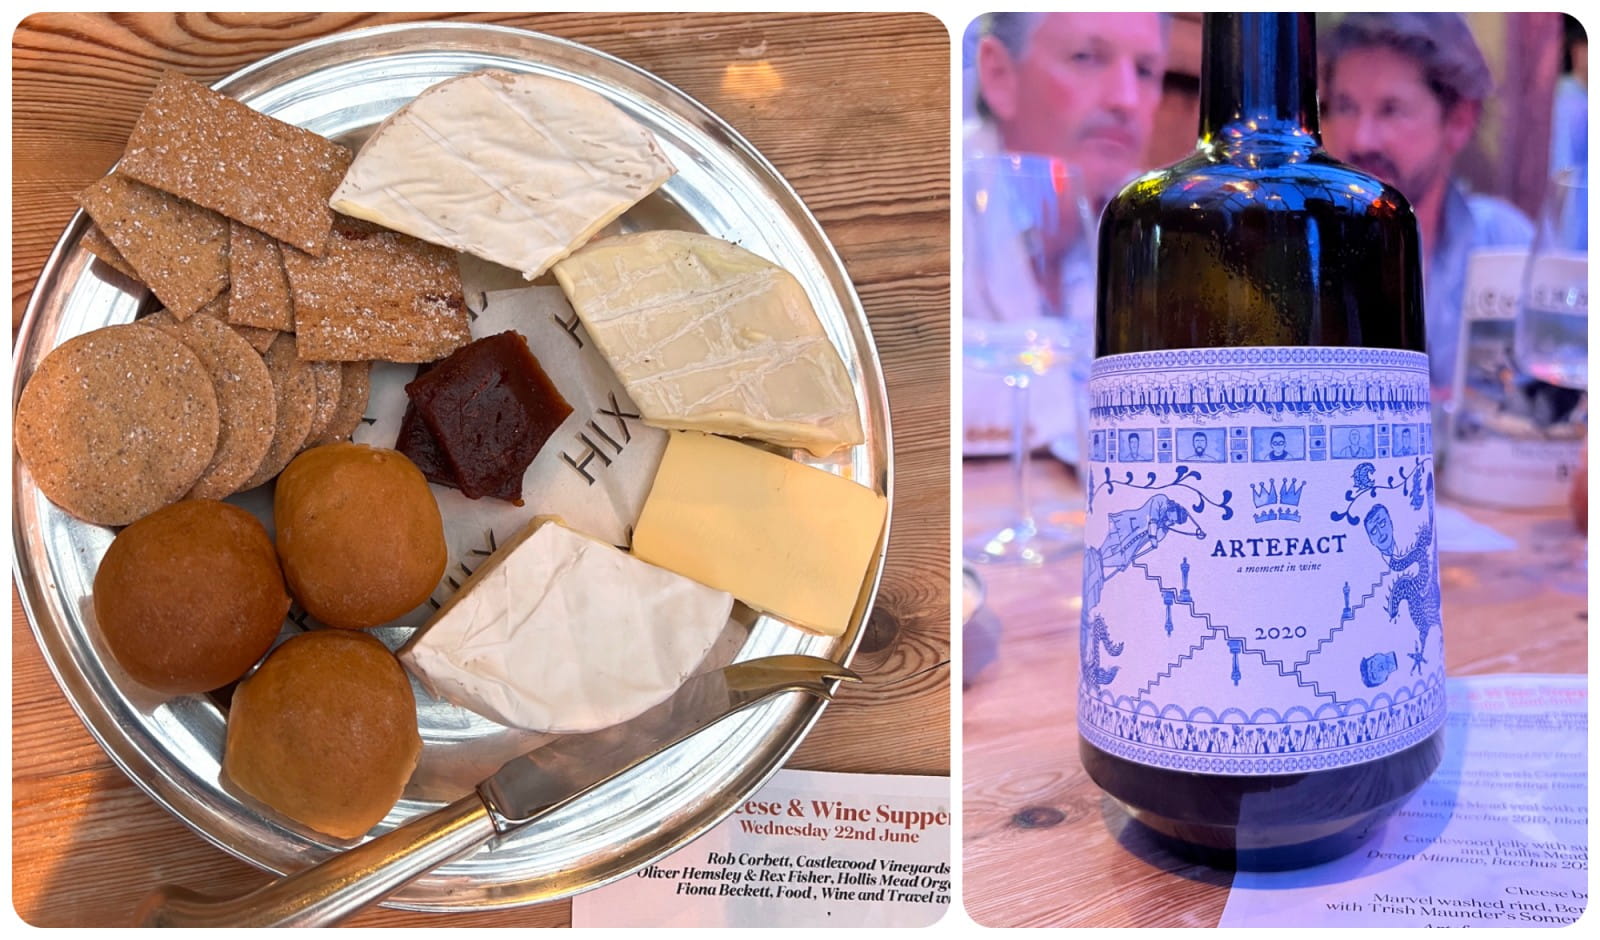 Camembert-style cheese and amphora-aged Bacchus